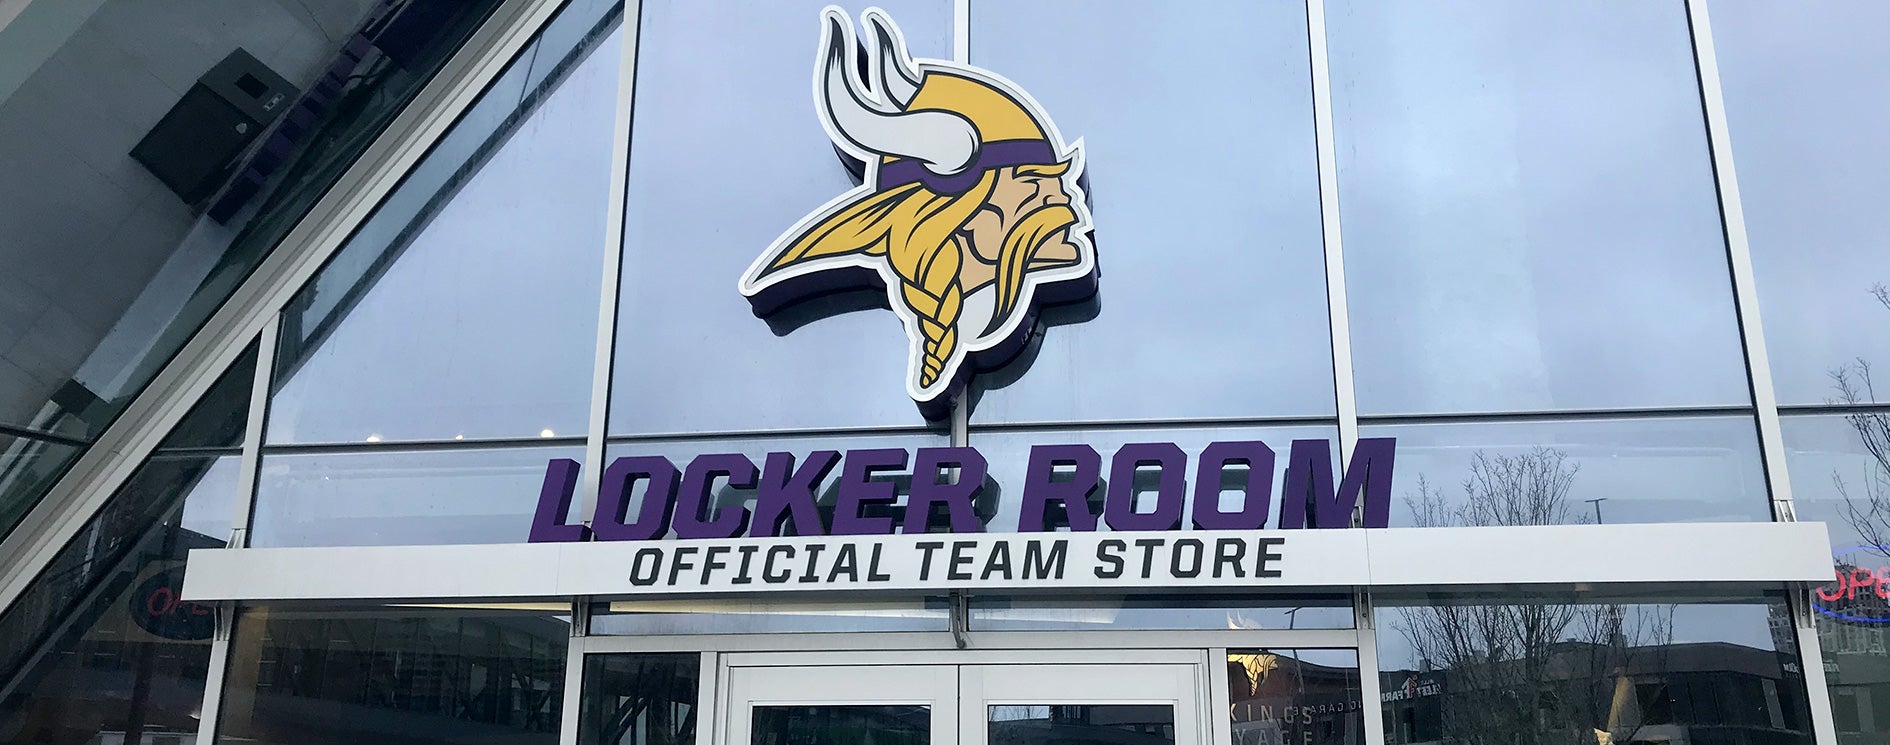 official team store